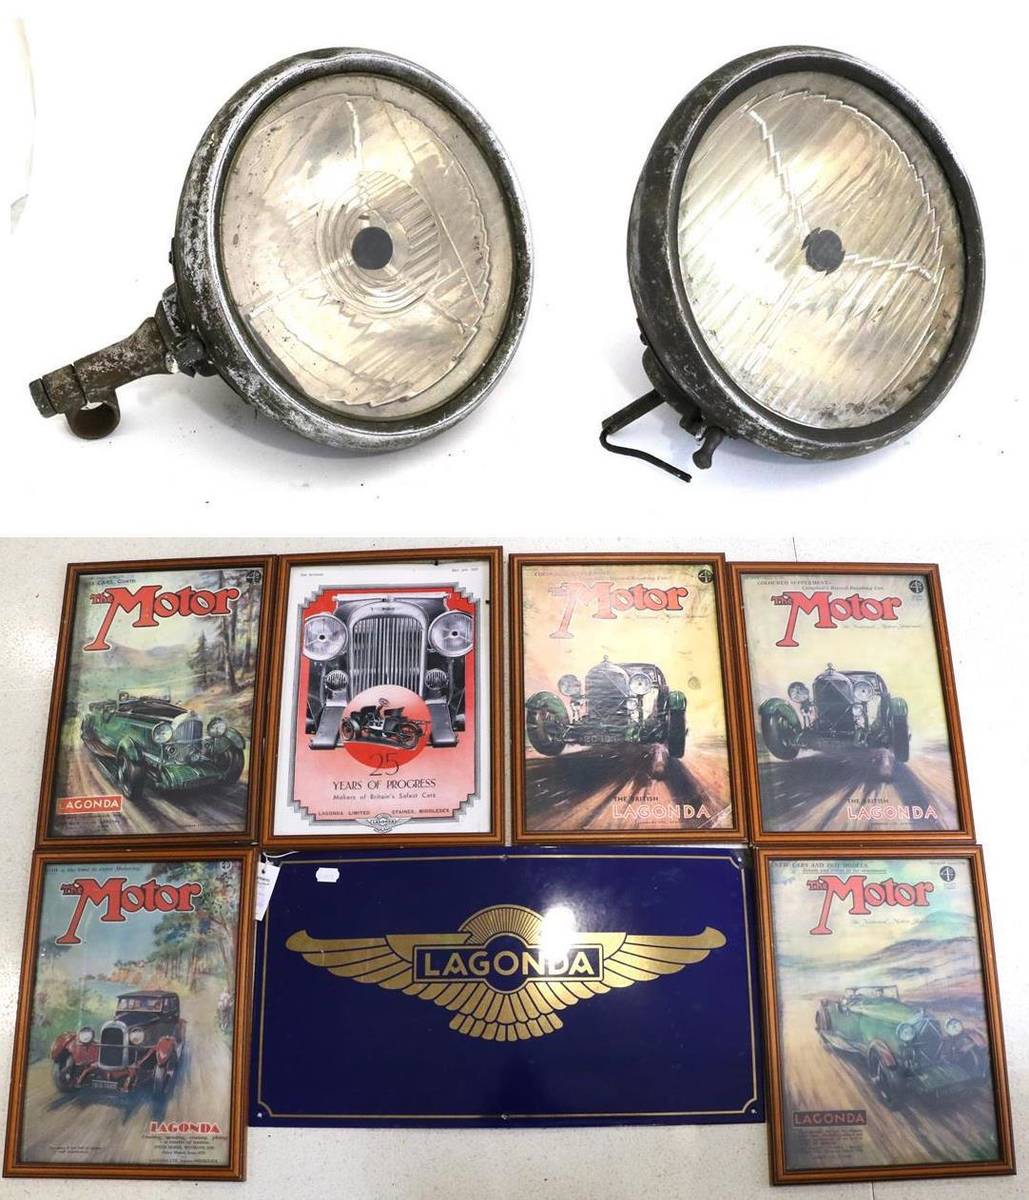 Lot 100 - A Pair of Early 20th Century 10in Bull's Eye Headlamps, with mounting brackets; A Reproduction Blue